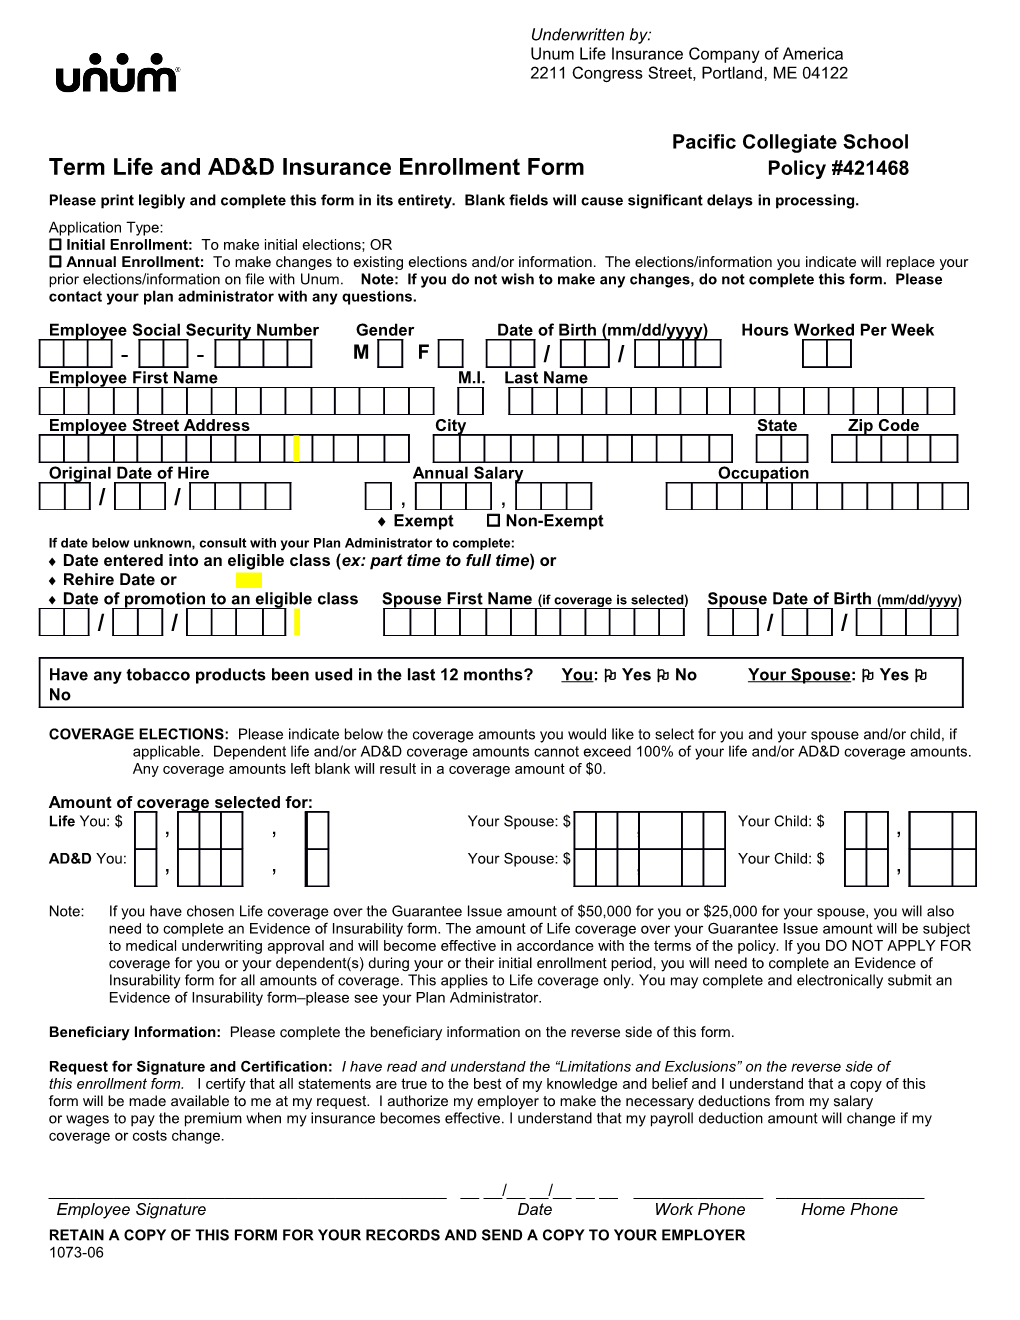 Term Life and AD&D Insurance Enrollment Form Policy #421468